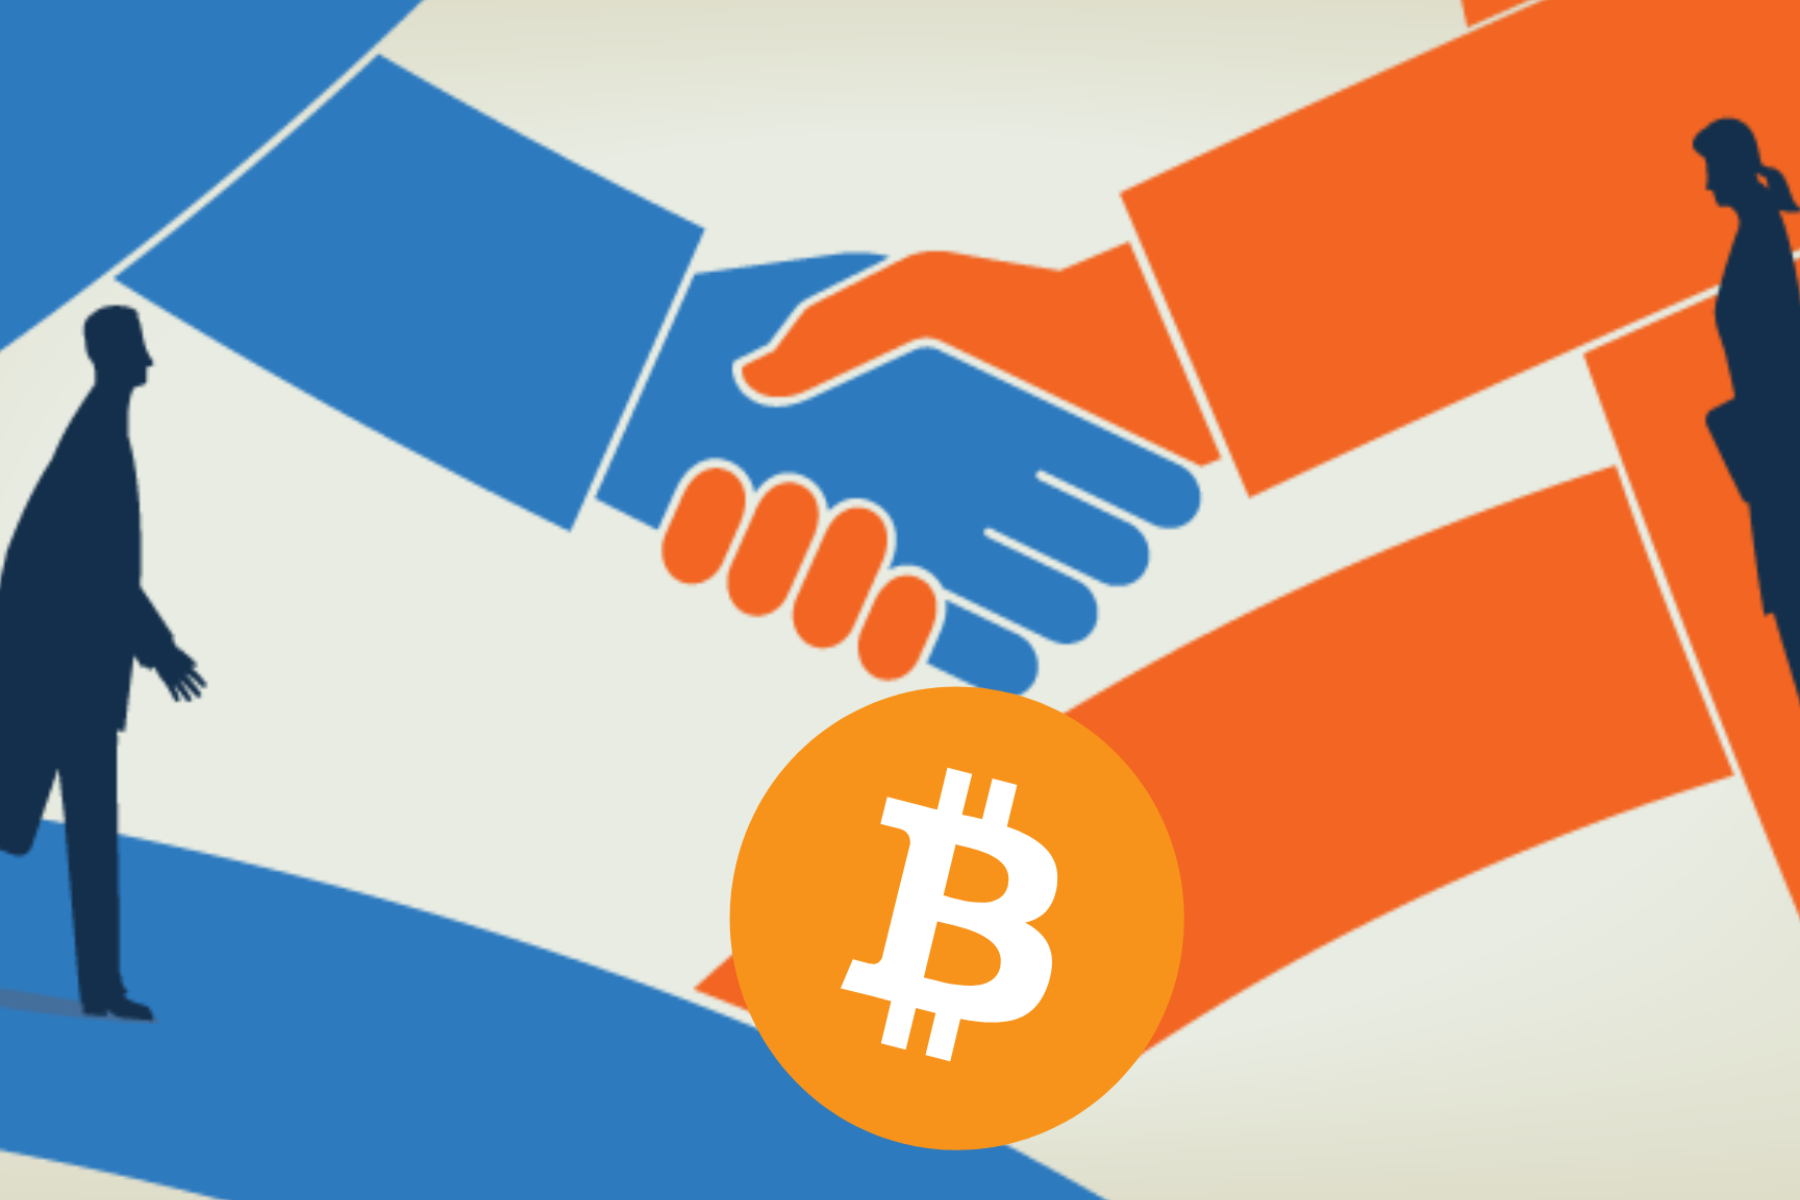 A Bitcoin being held by two hands in a handshake gesture